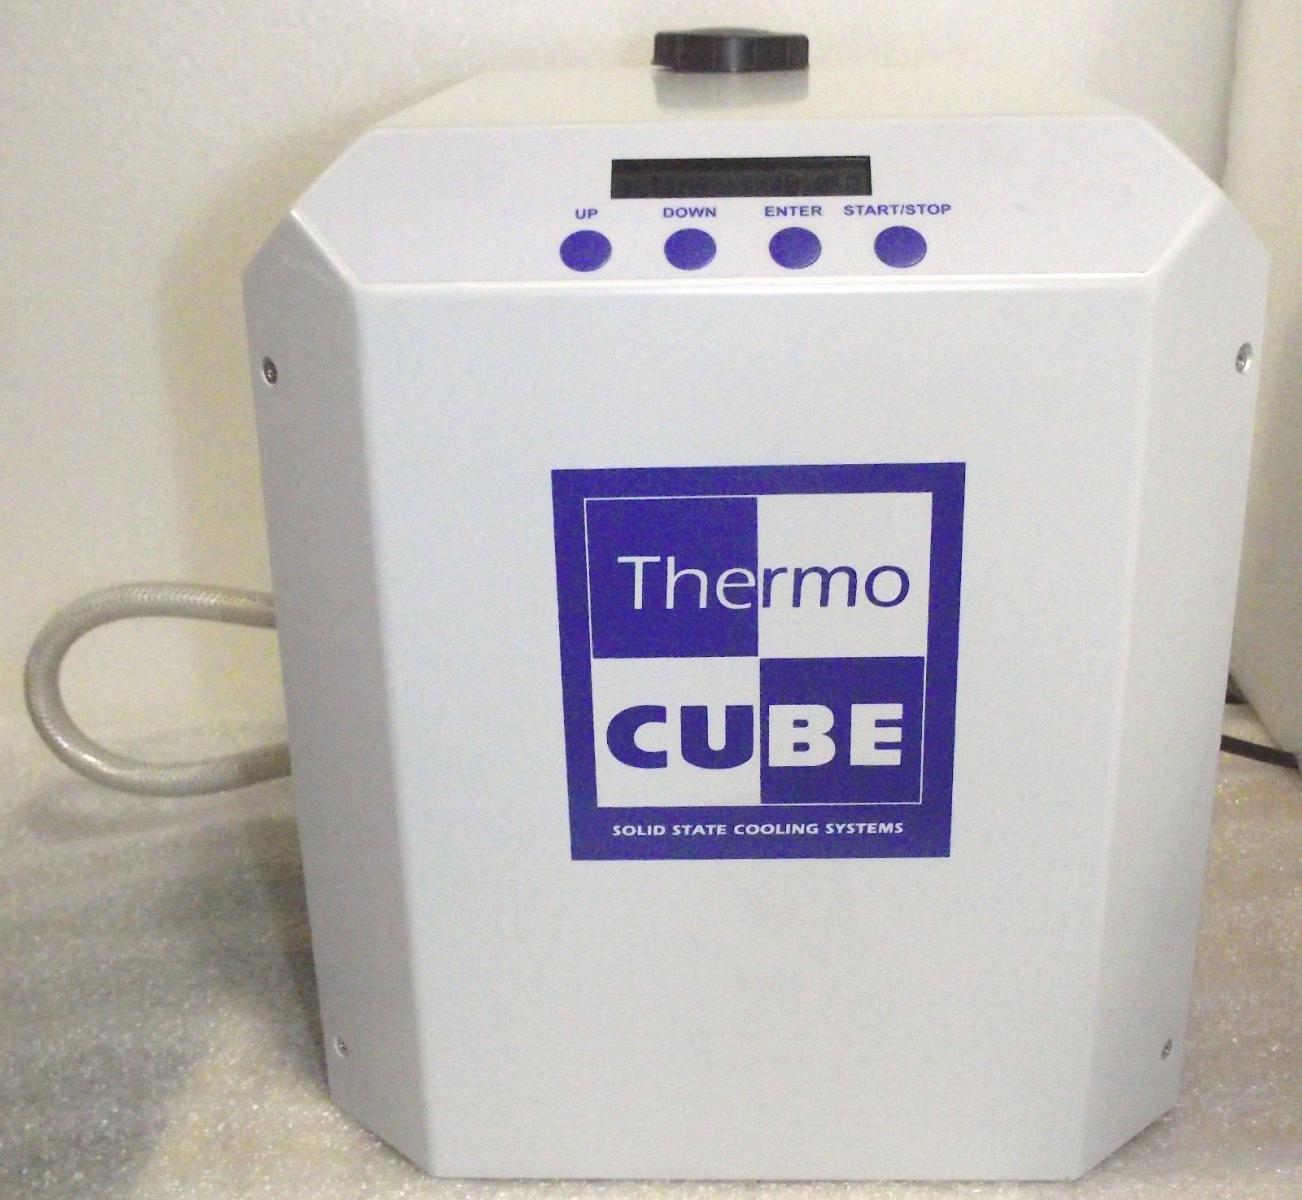 Photo Used THERMOCUBE 10-265-1C-1-CP-AR For Sale